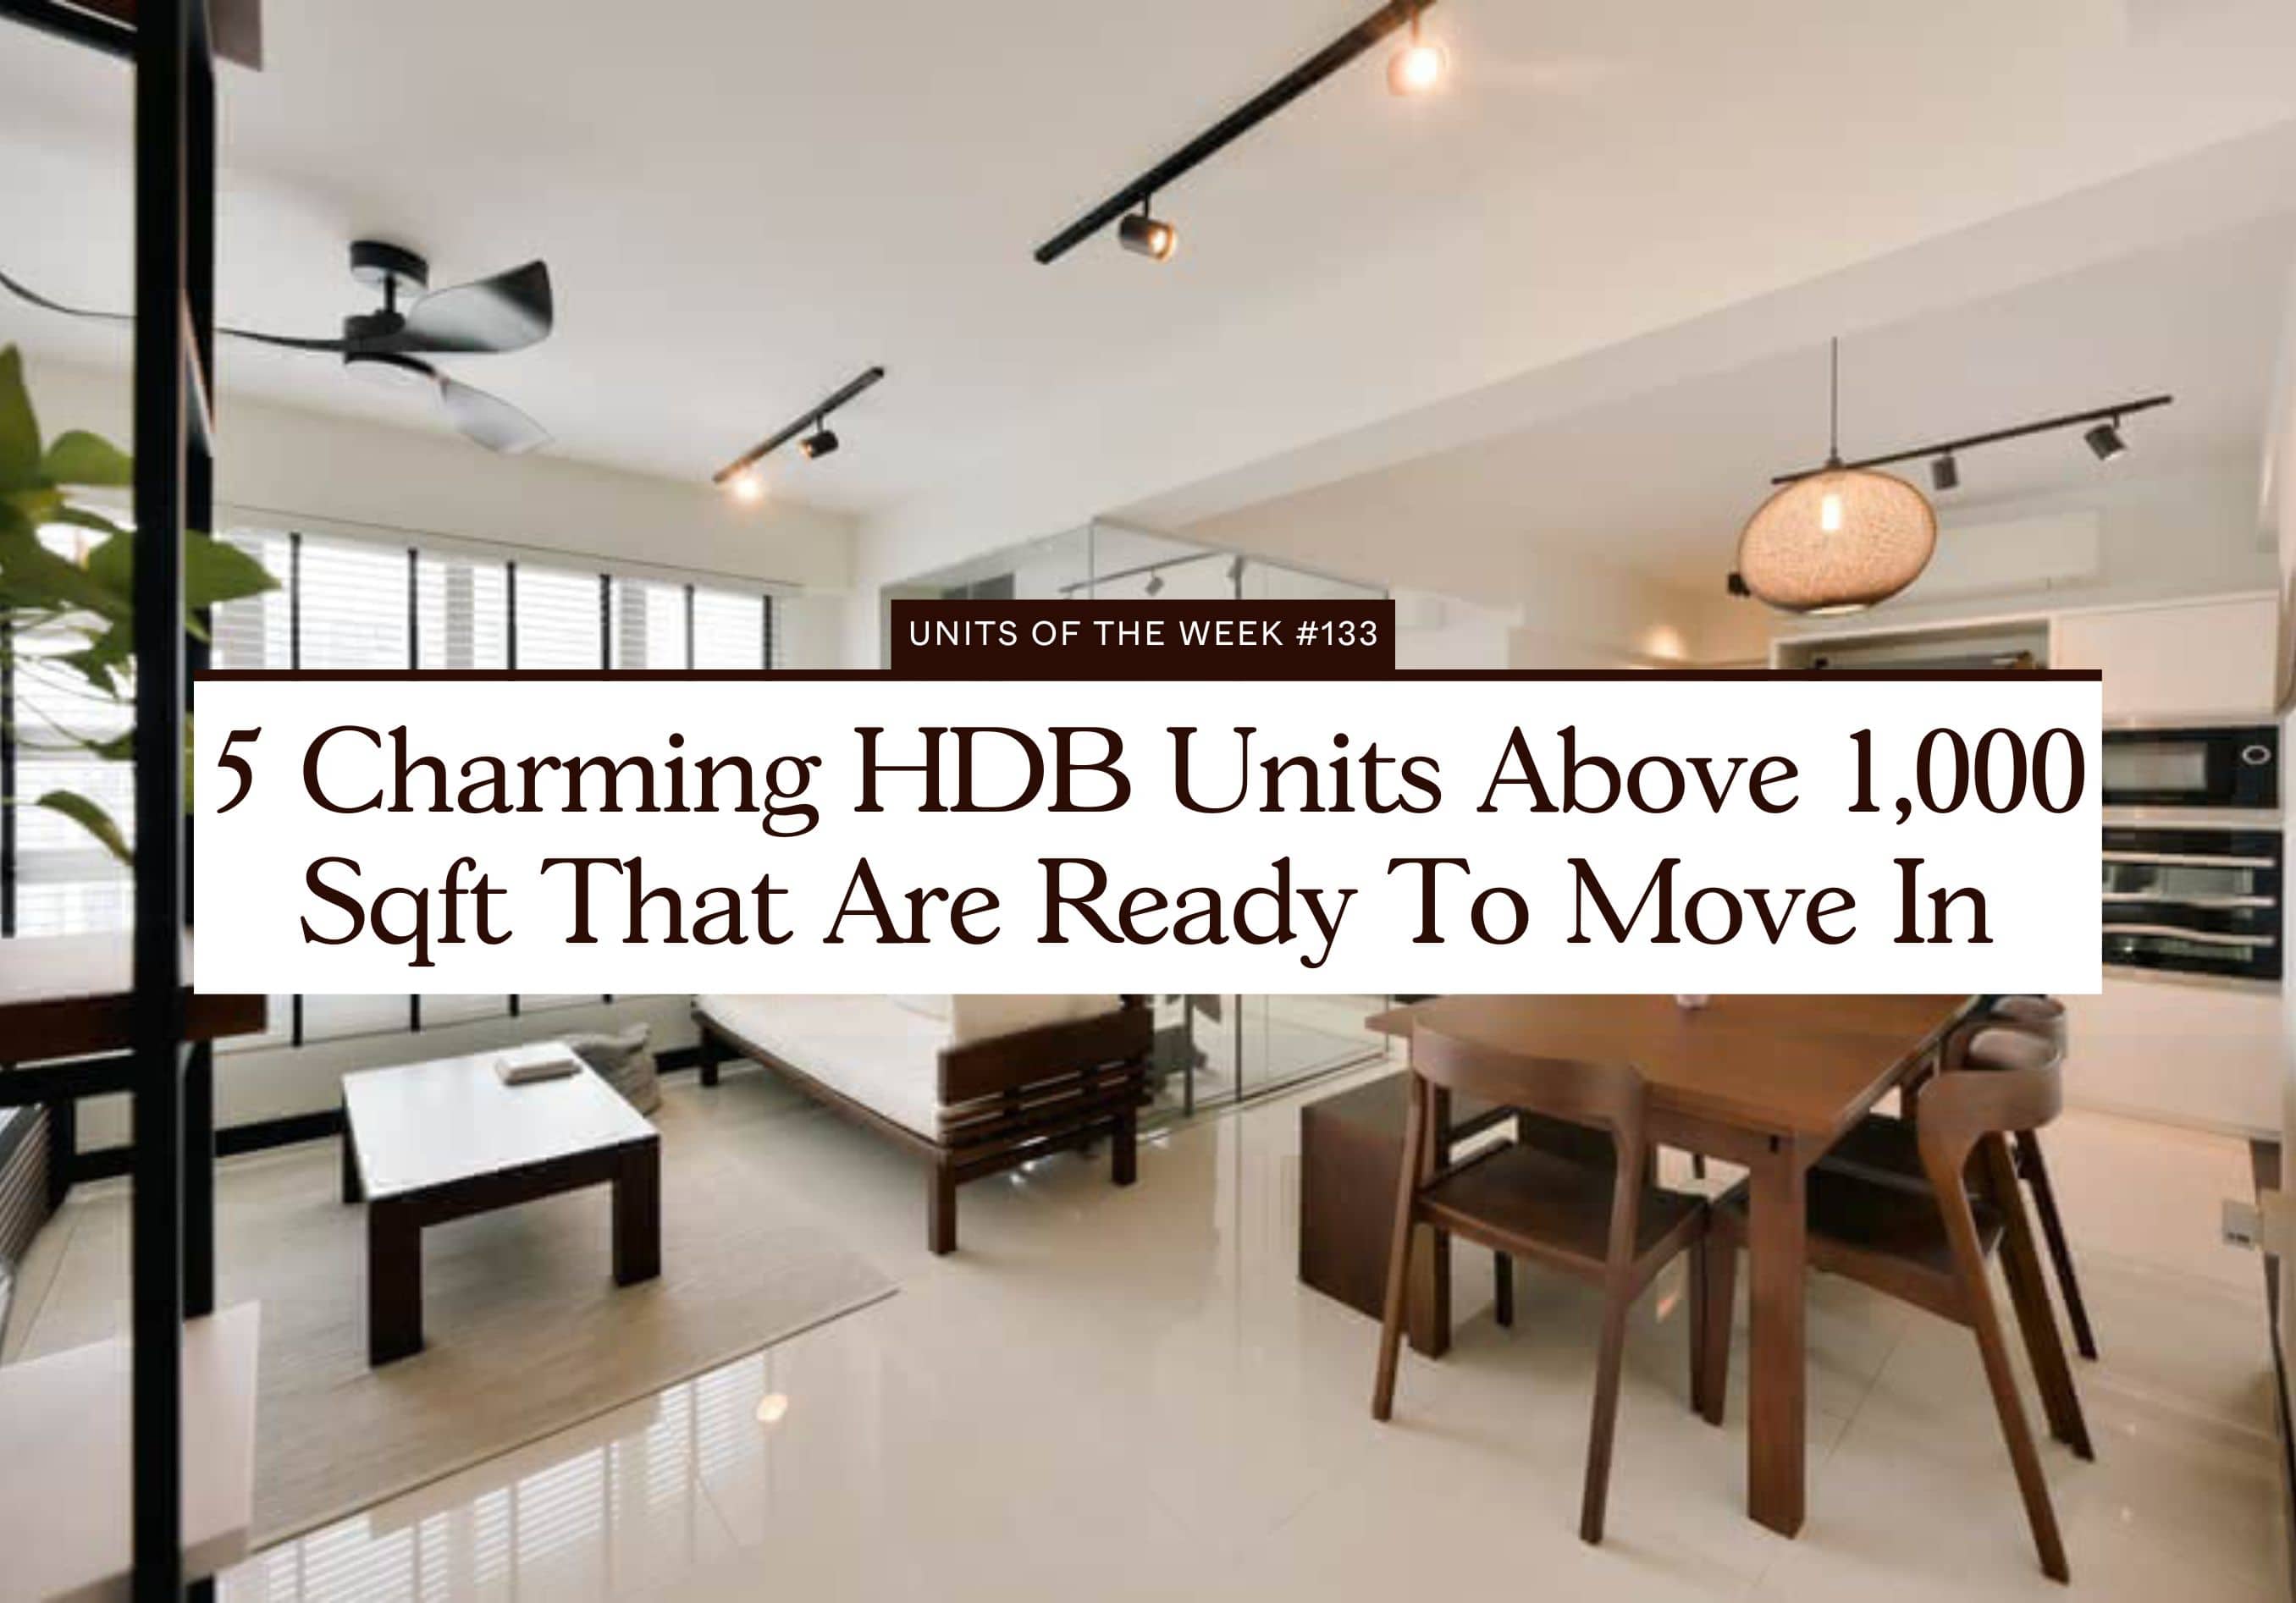 5 Charming HDB Units Above 1,000 Sqft That Are Ready To Move In